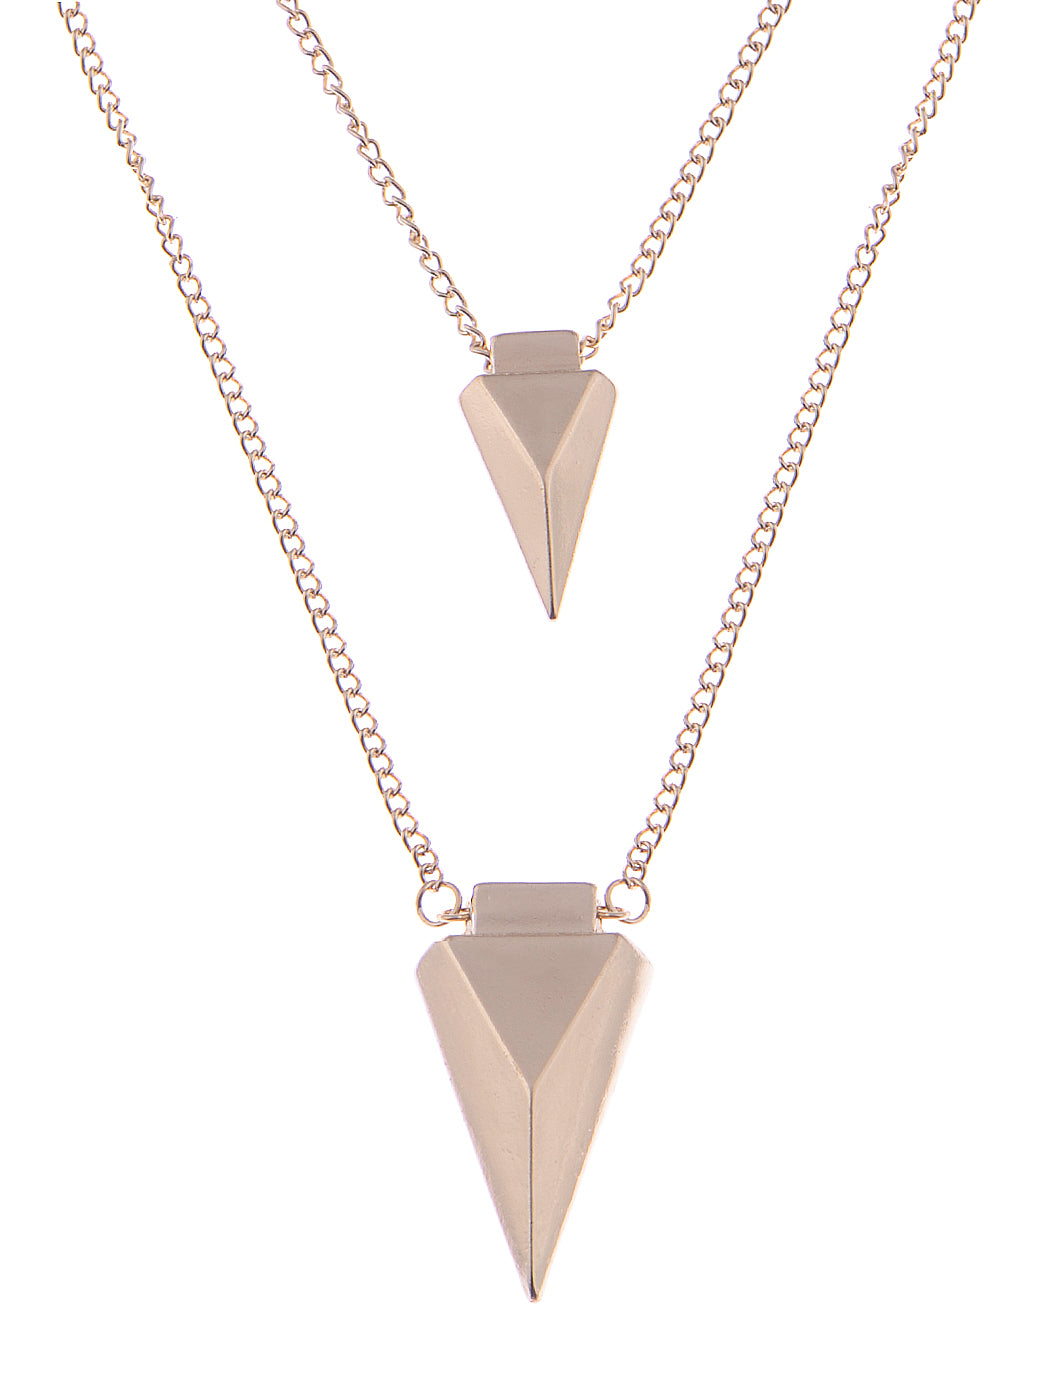 Pyramid Shaped Twin Pendant Linked Chain Necklace